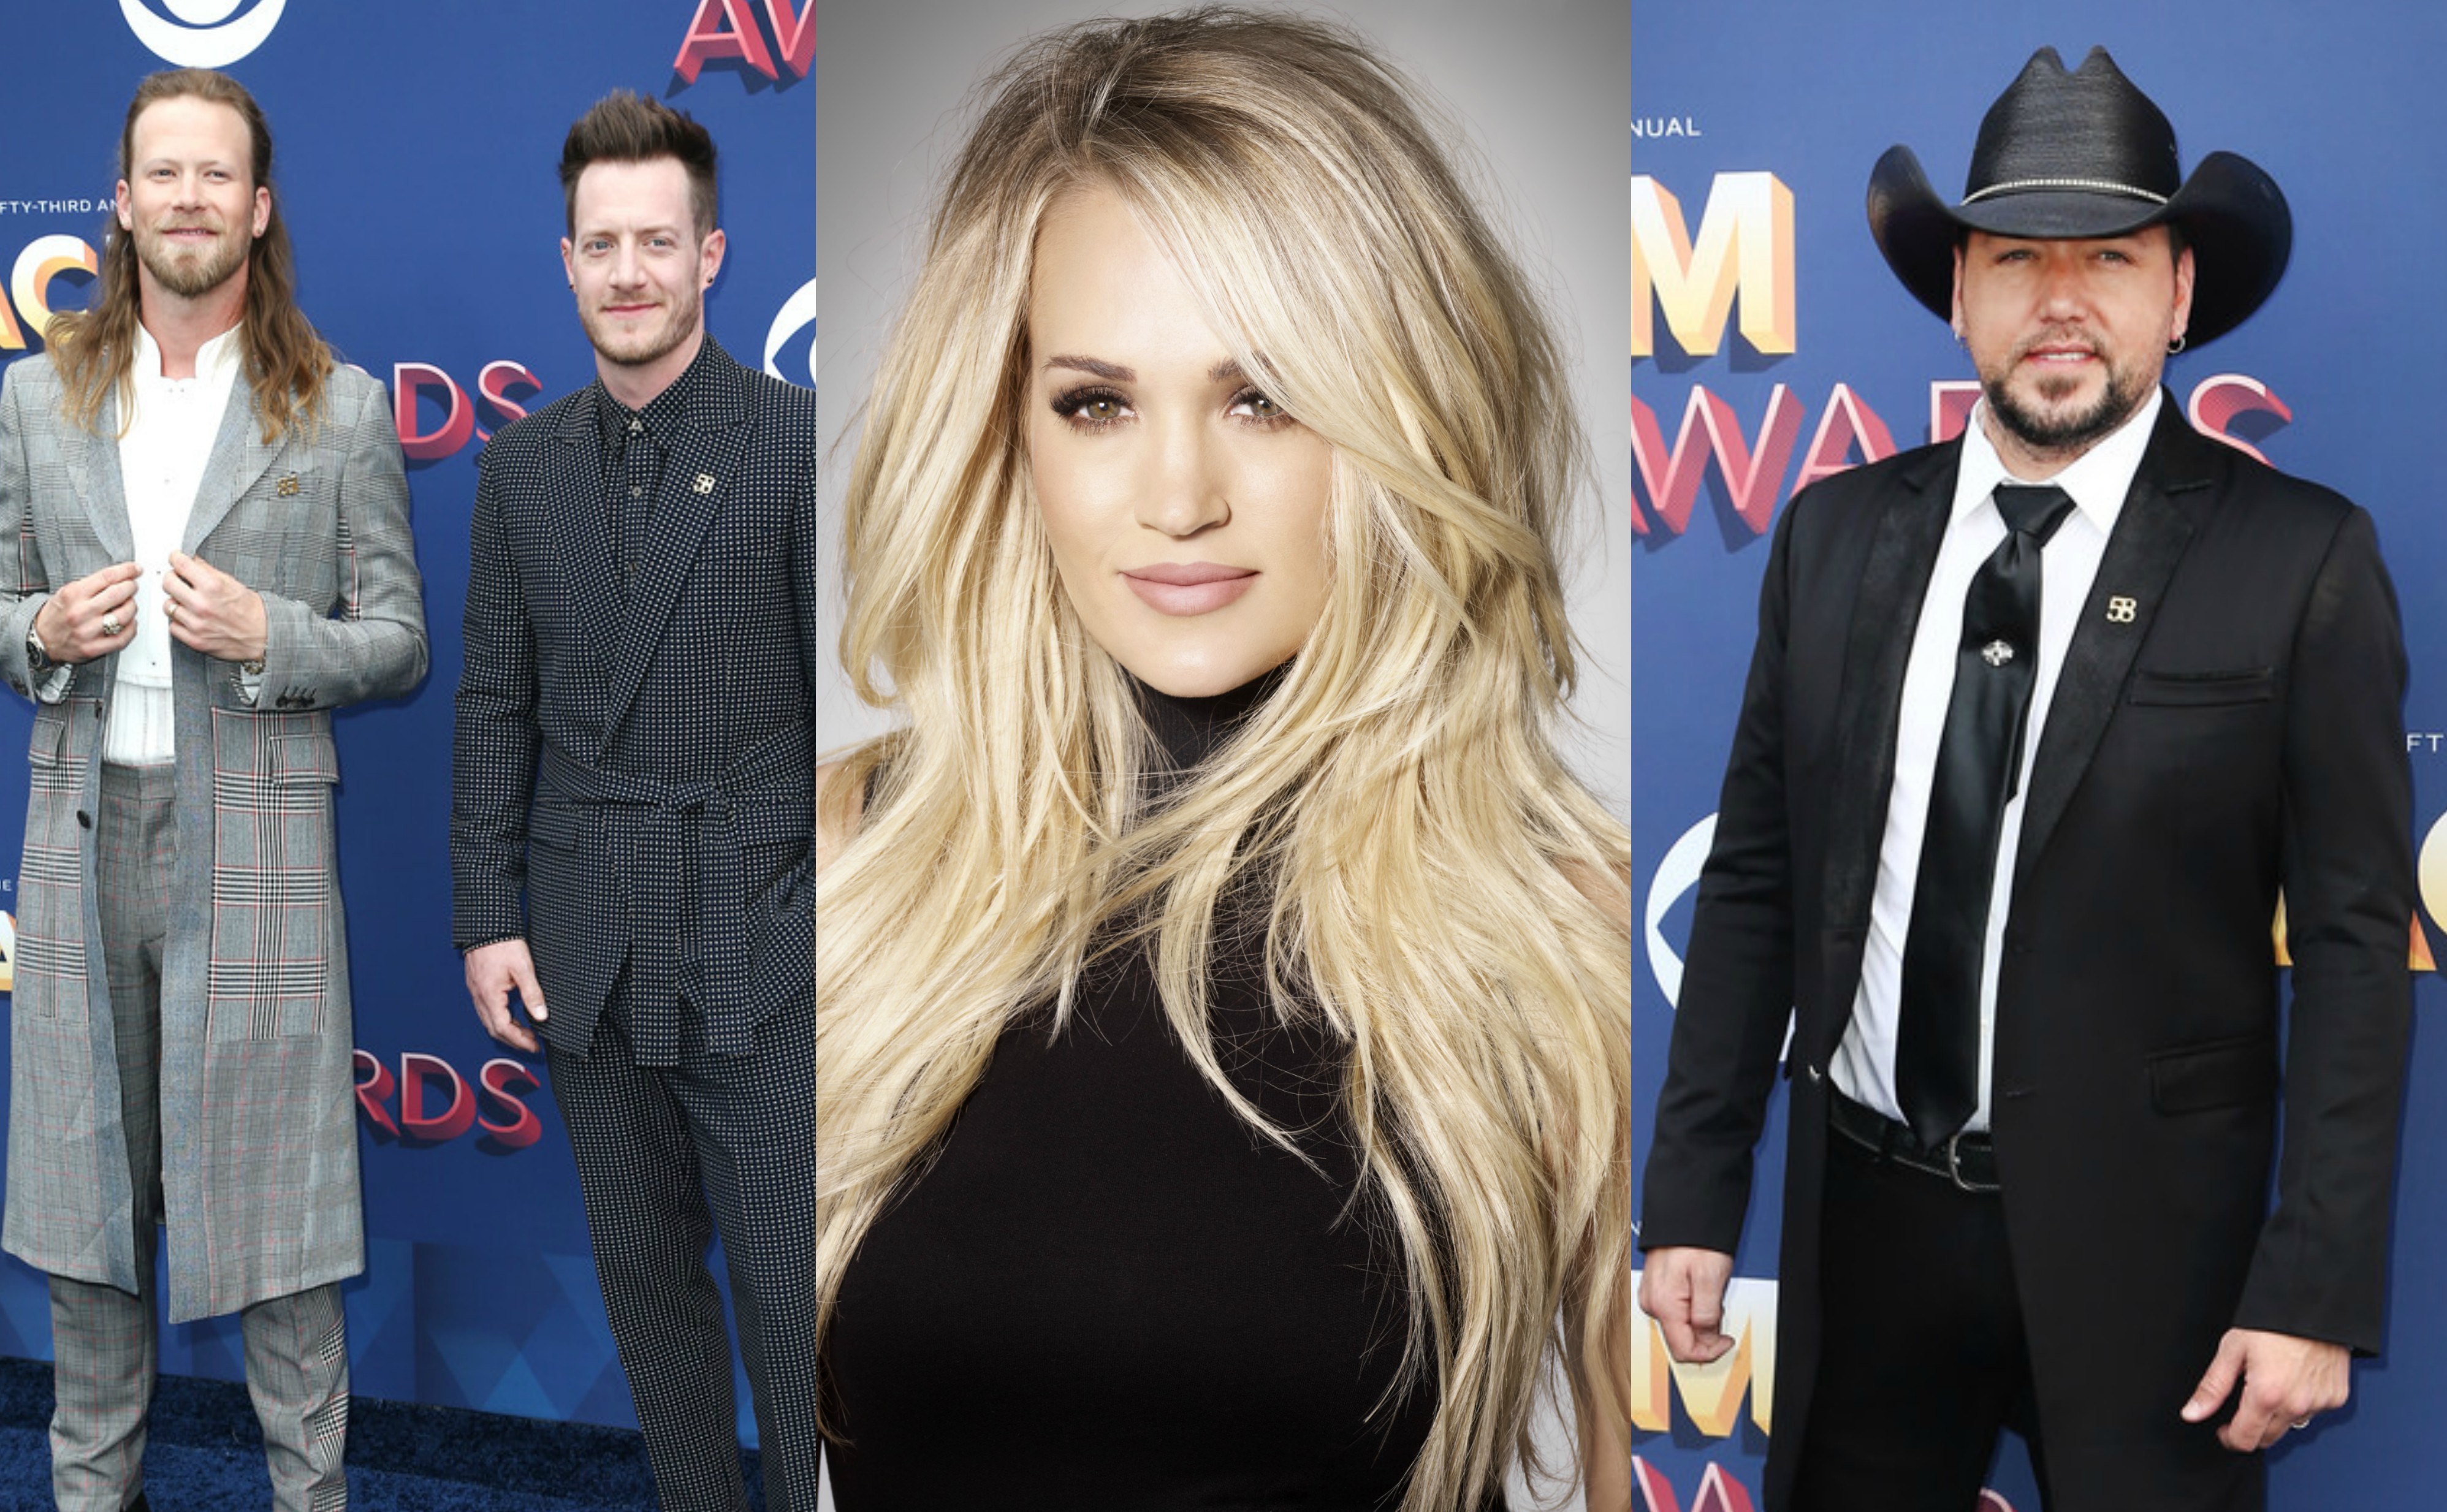 Carrie Underwood, Florida Georgia Line and Jason Aldean Lead Nominations for 2018 CMT Music Awards